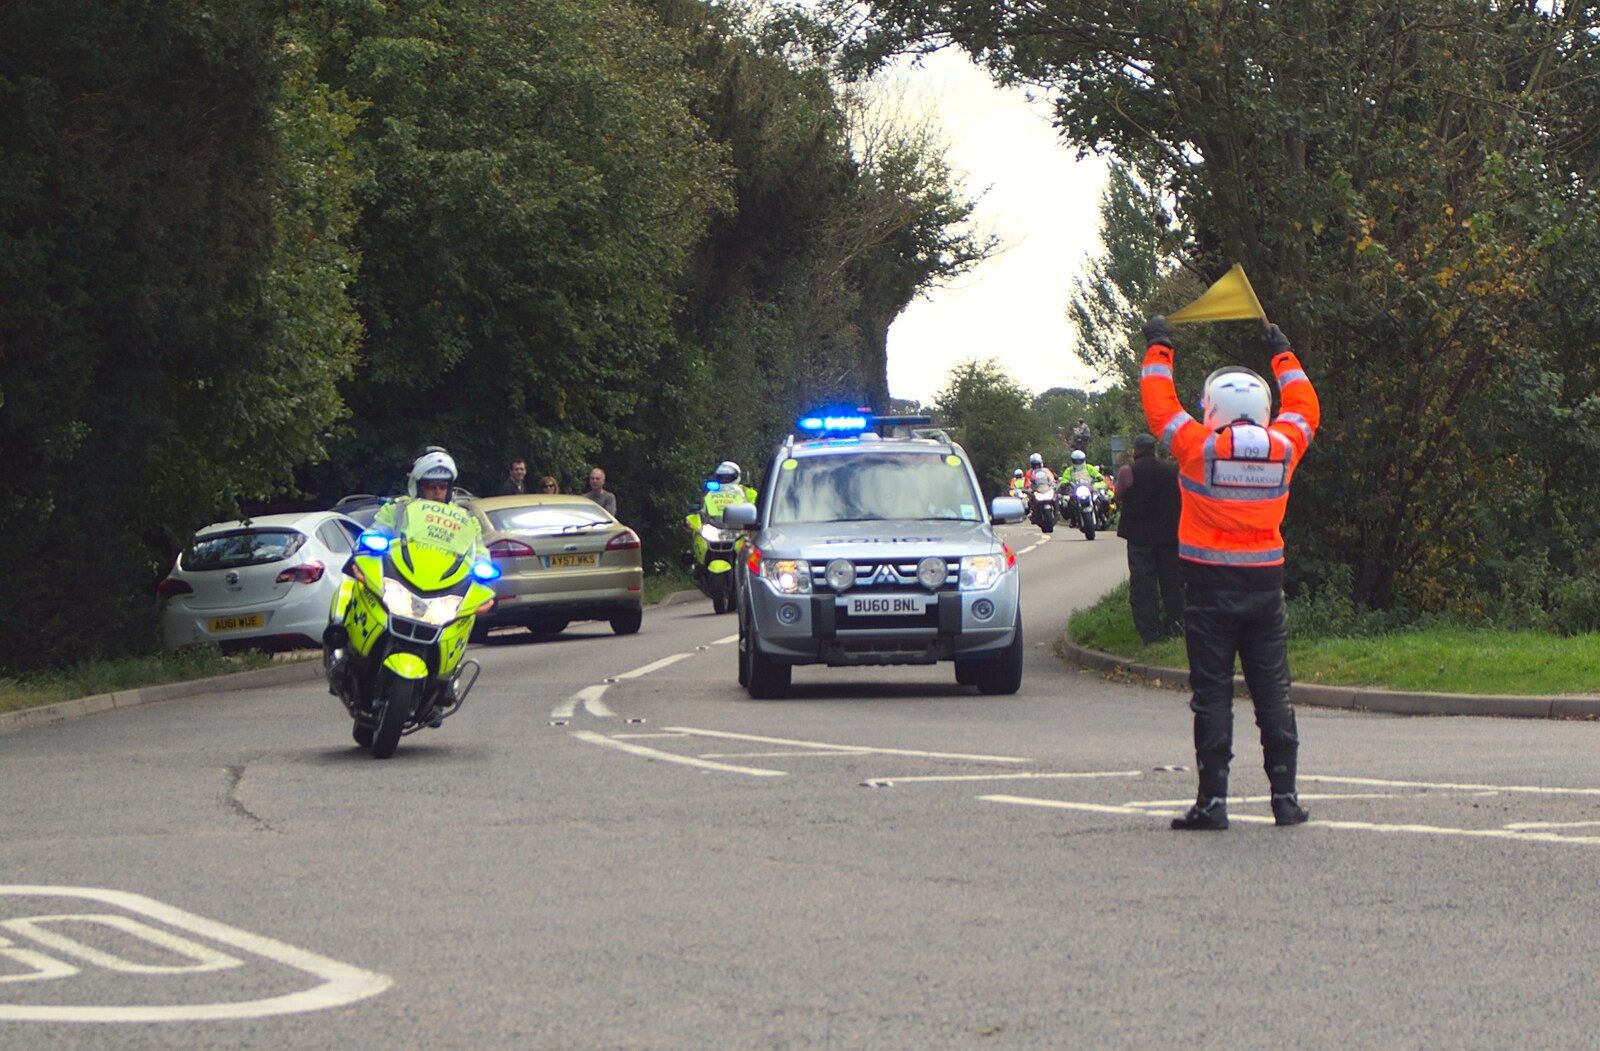 Motorbike outriders steam down the B1077 from The Tour of Britain, Brome, Suffolk - 17th September 2011